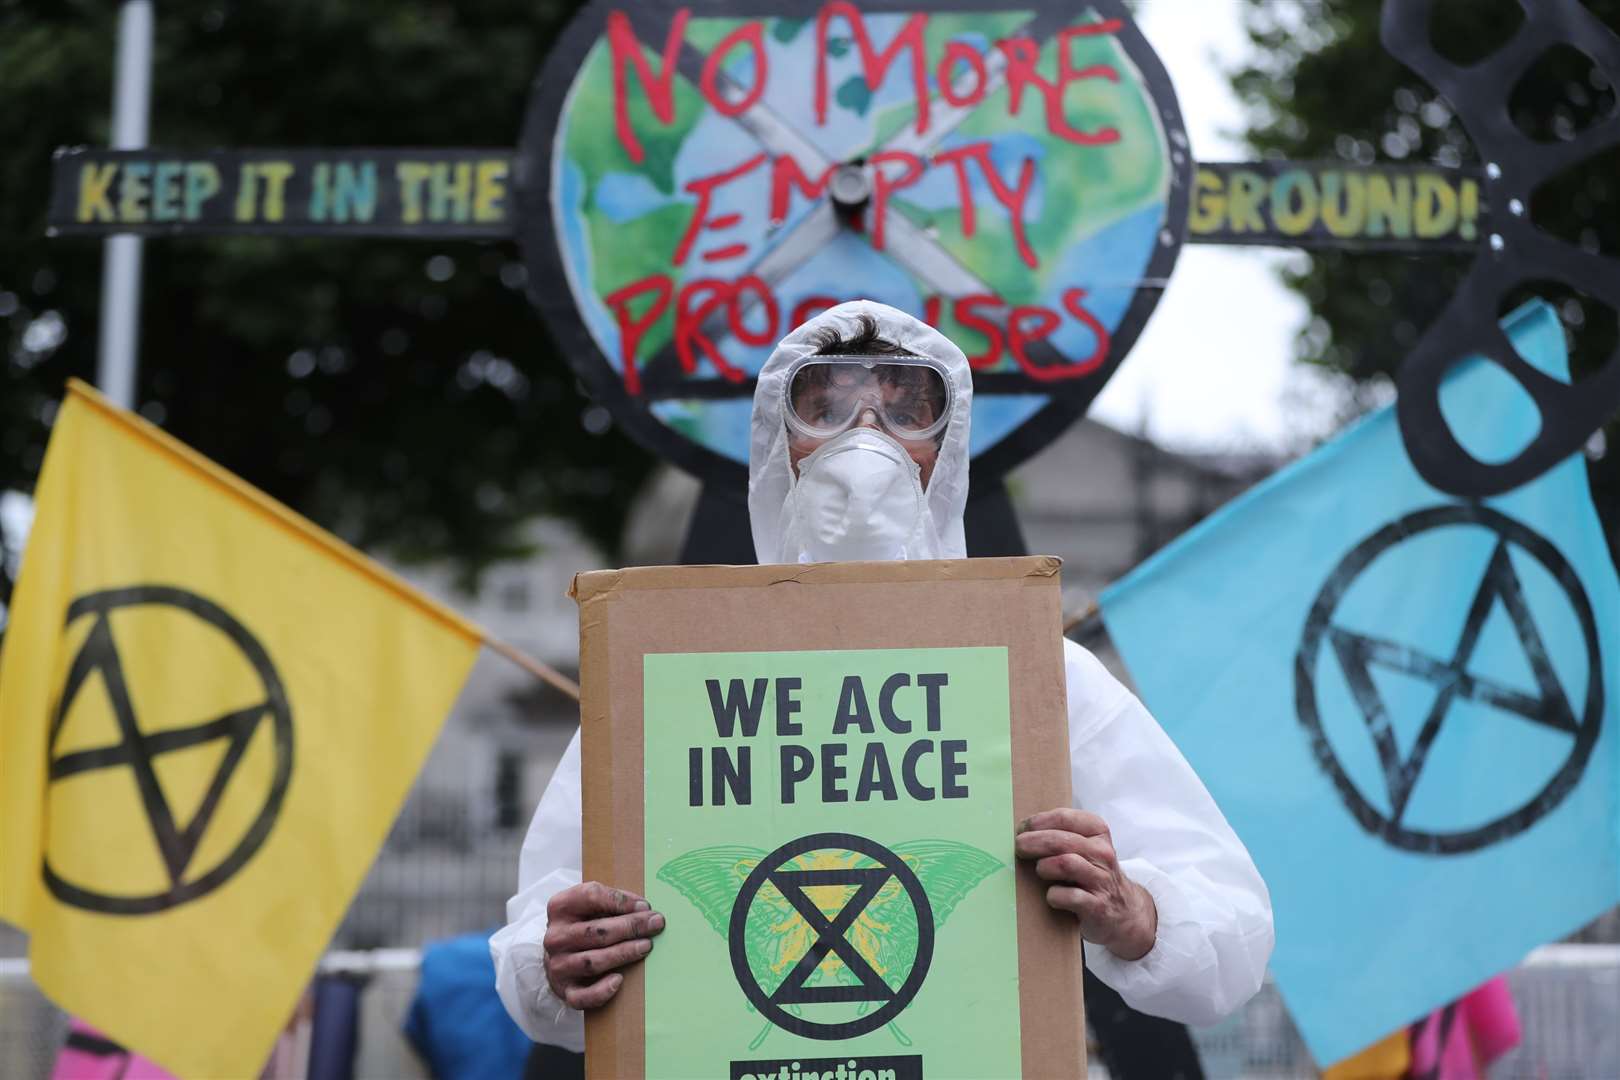 Extinction Rebellion has said it will be in Glasgow during the climate summit (Niall Carson/PA)